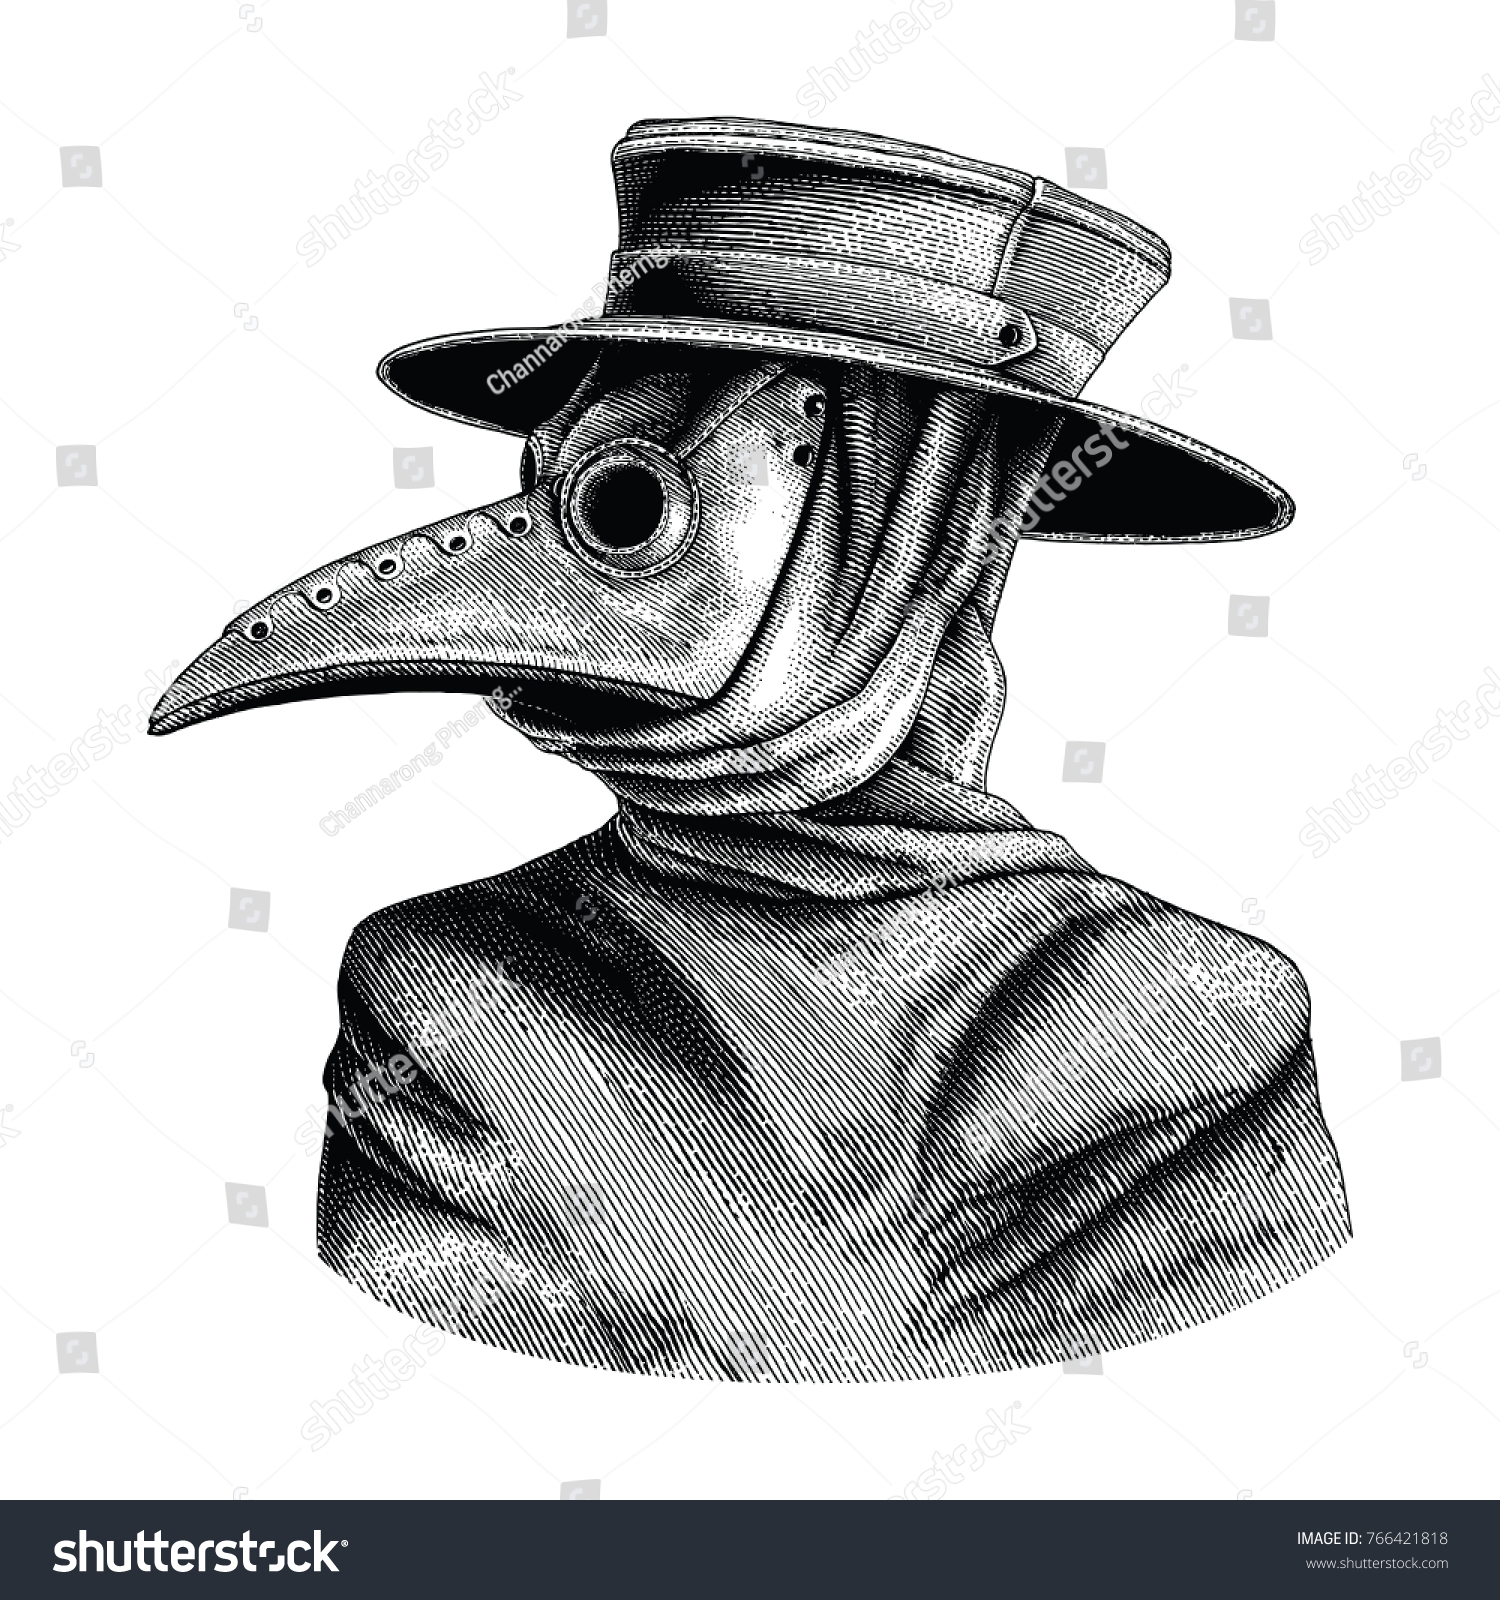 SVG of Plague doctor hand drawing vintage engraving isolate on white background svg